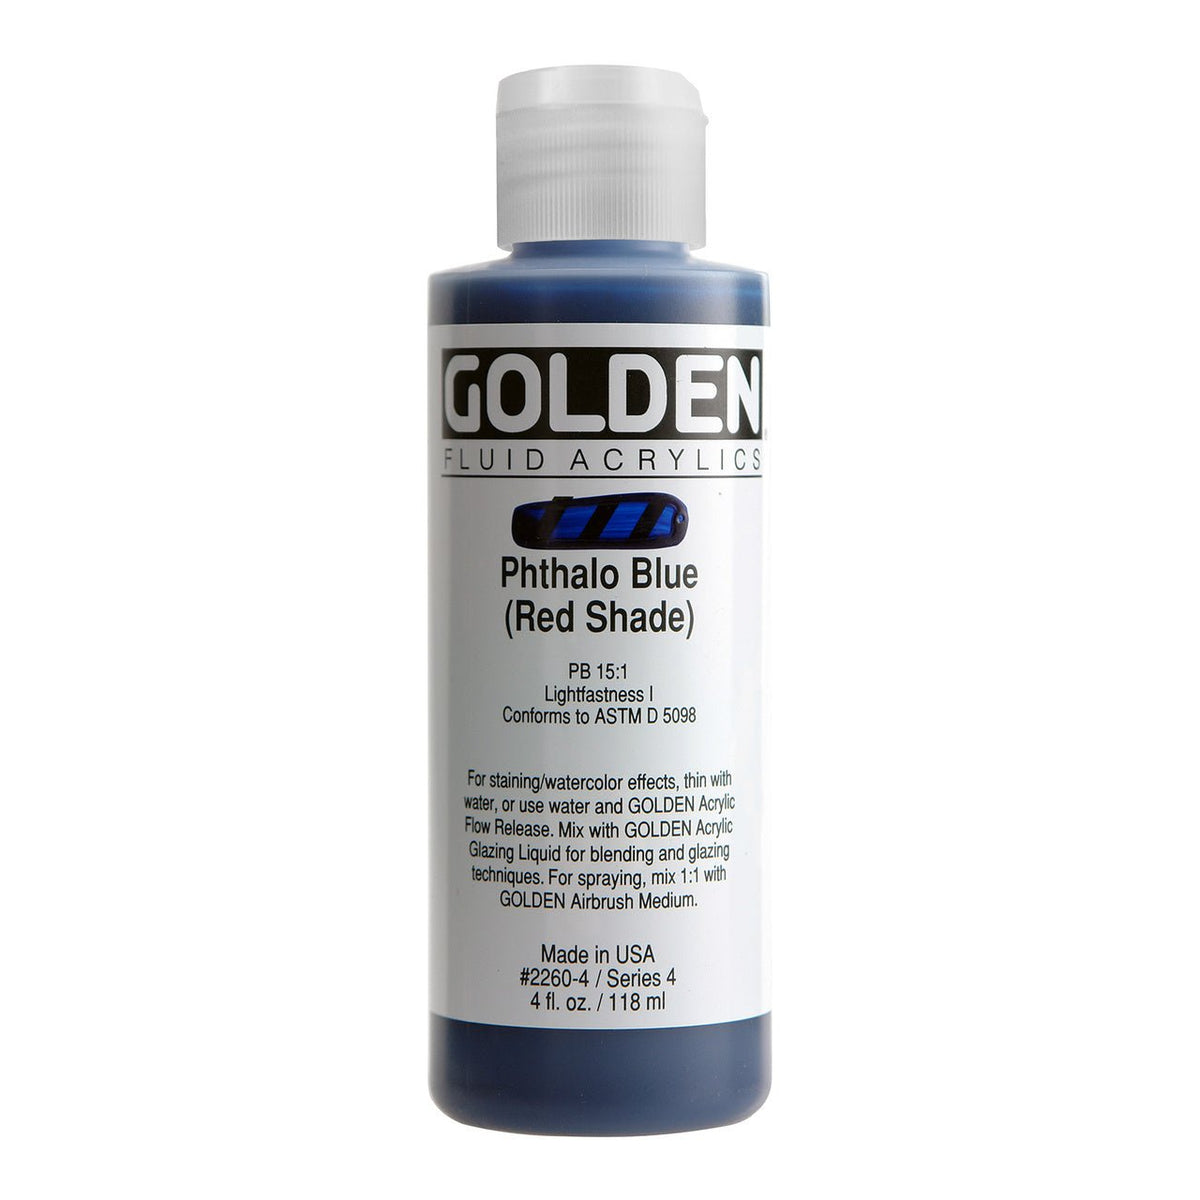 Golden Fluid Acrylic Phthalo Blue (red shade) 4 oz - merriartist.com